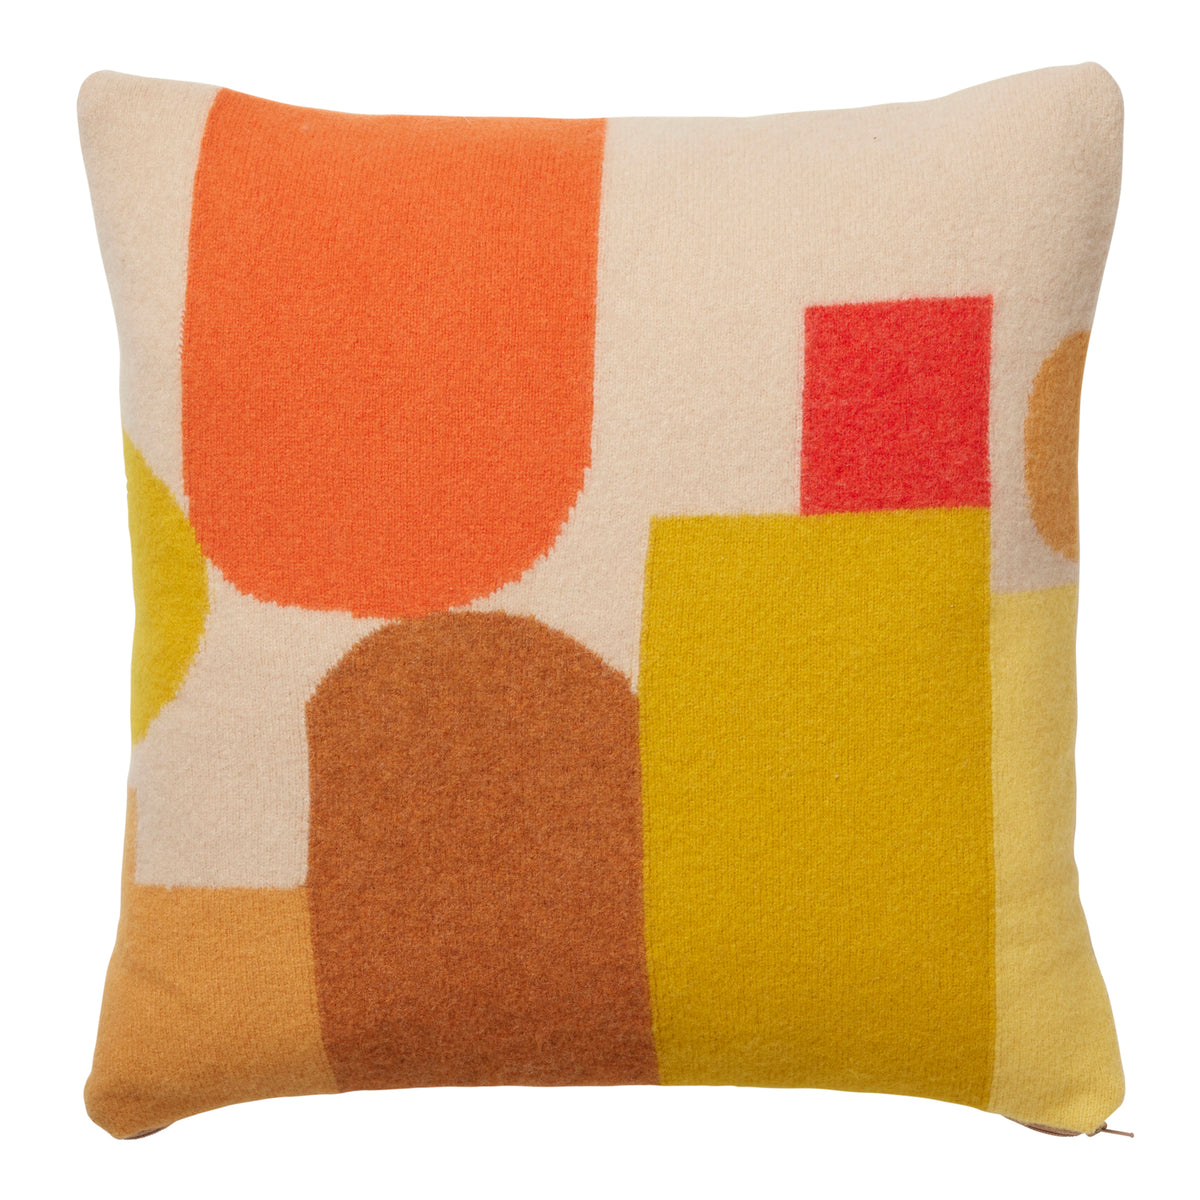 yellow, orange, brown and red geometric knitted cushion by Donna Wilson